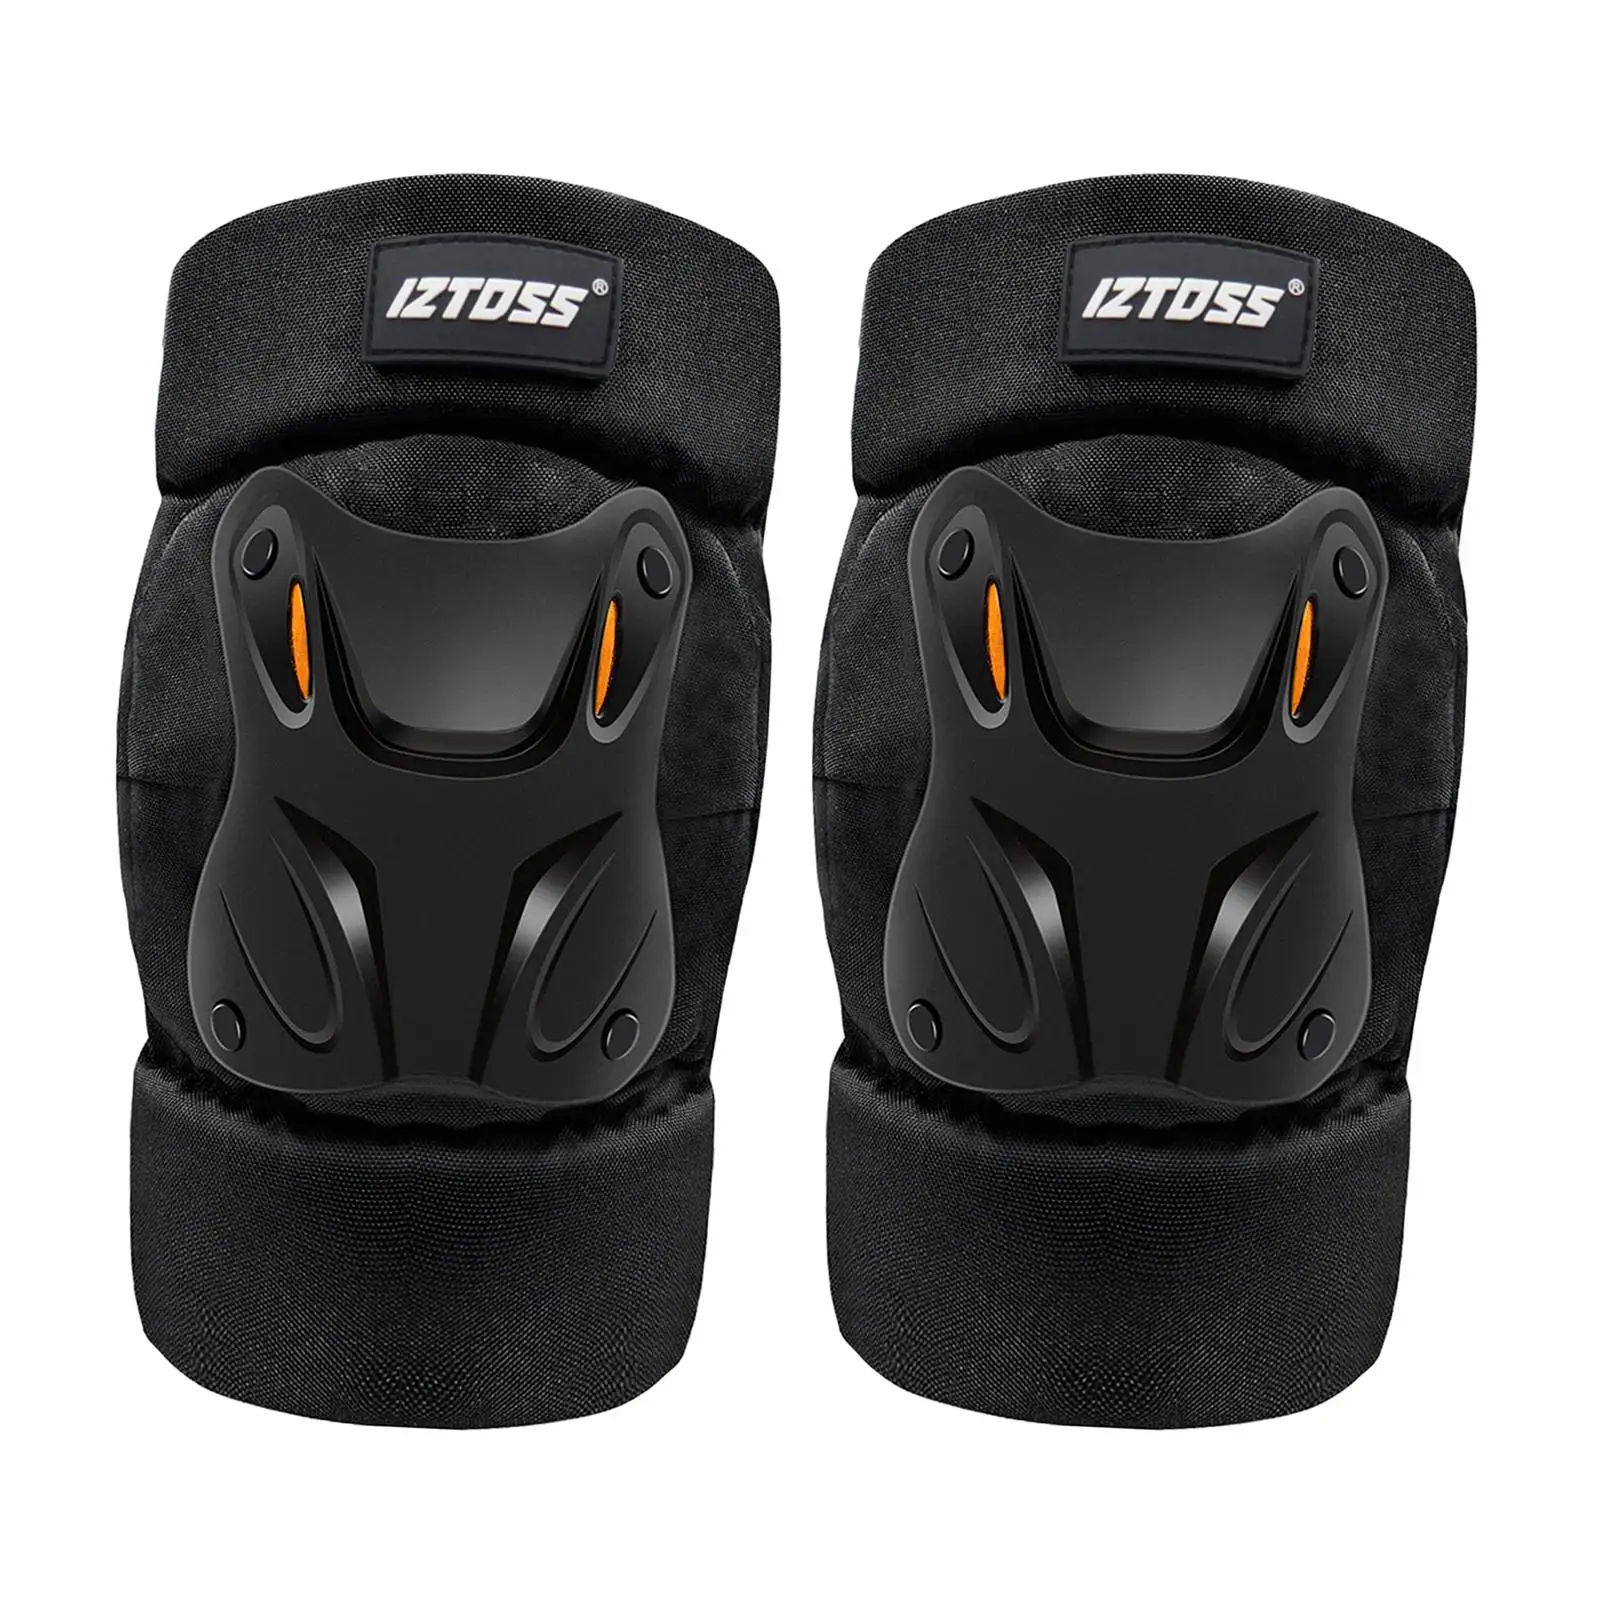 2x Motocross Knee Guard Protector Breathable Elbow Pads for Mountain Biking